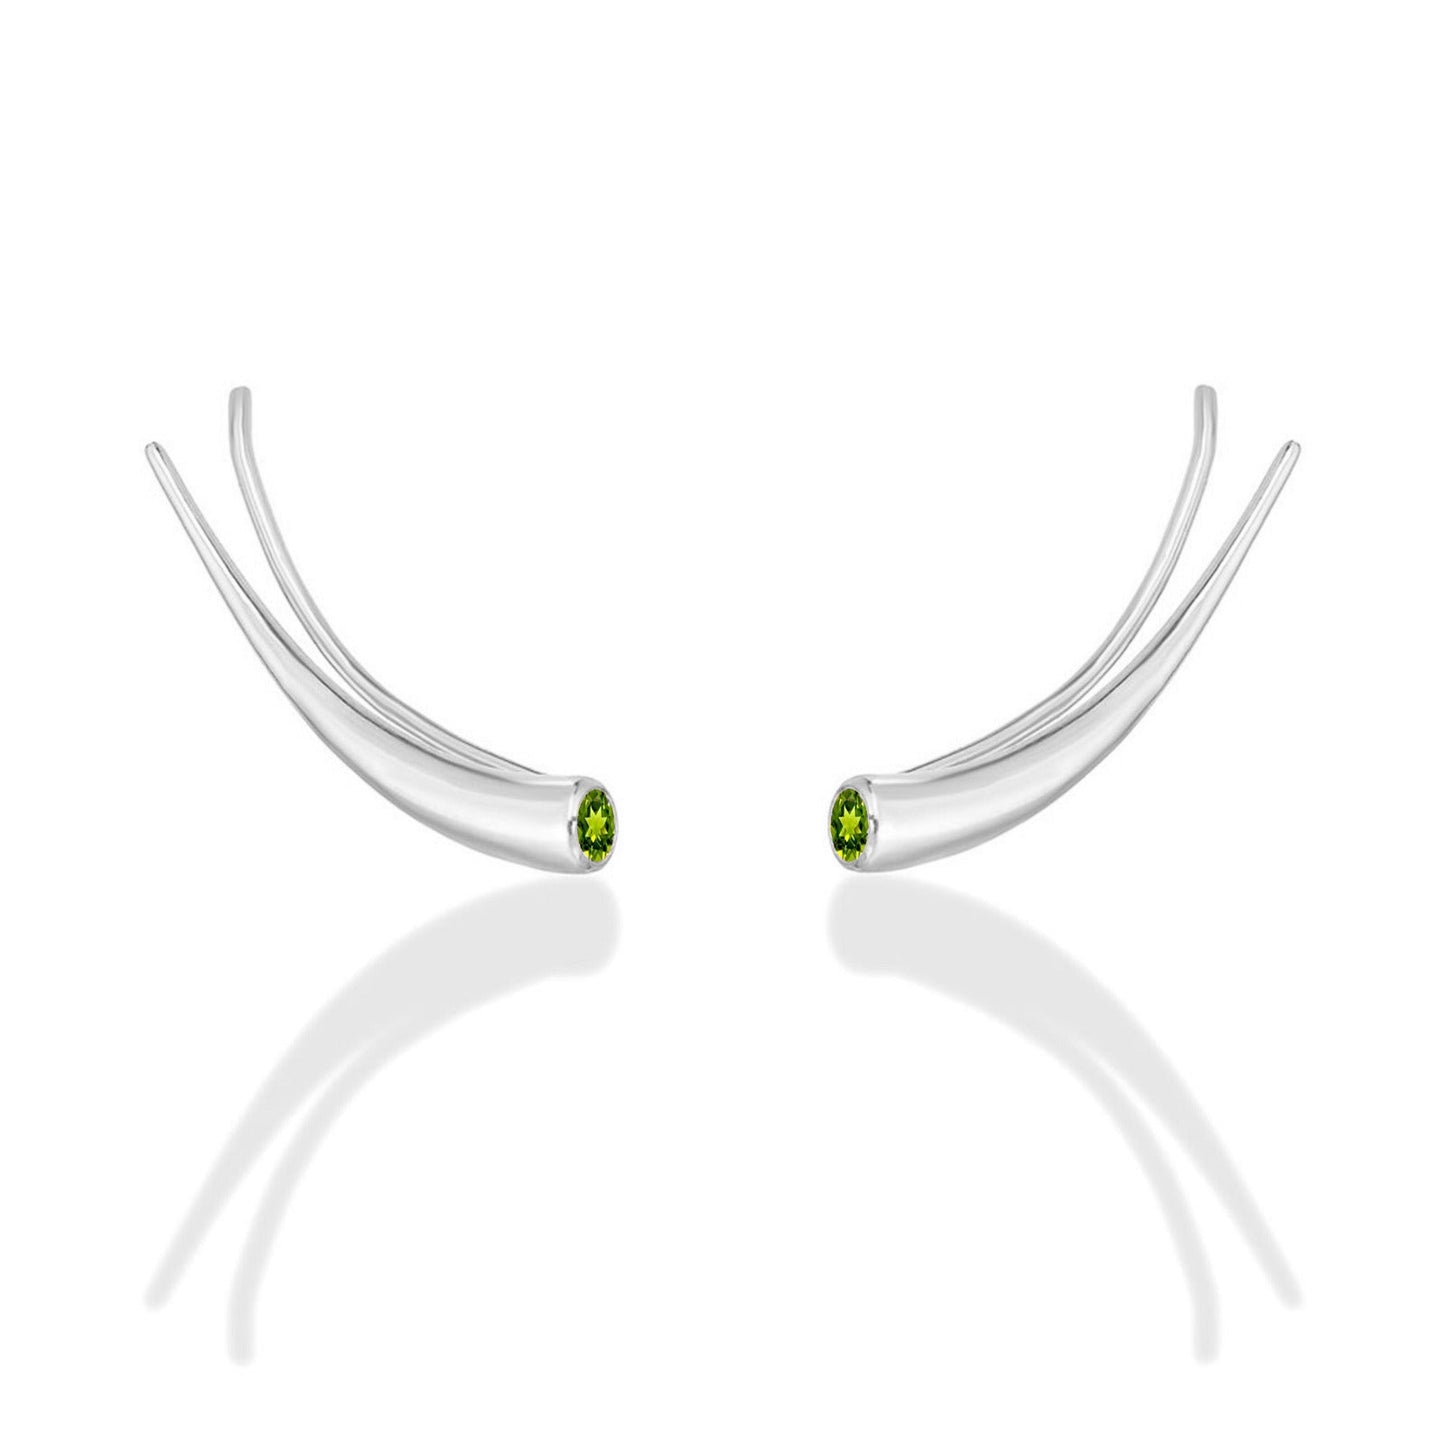 14k white gold Curved Quill Climber Earrings with peridot